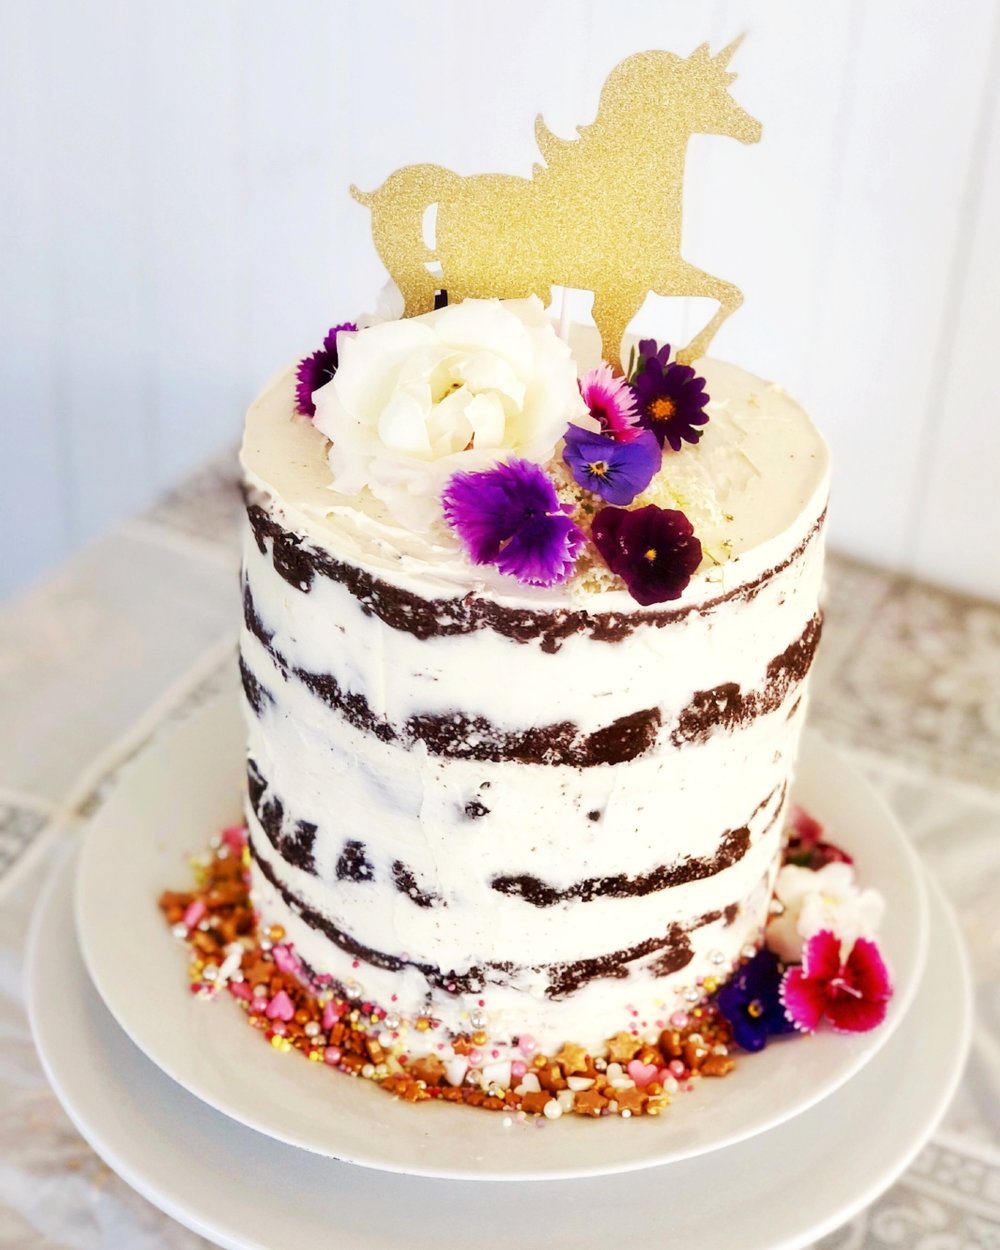 CELEBRATION CAKE$100 - Our chef can customise a beautiful semi-naked style celebration cake adorned with fresh flowers to provide a decadent finale to your child's party. Serves up to 30 people.